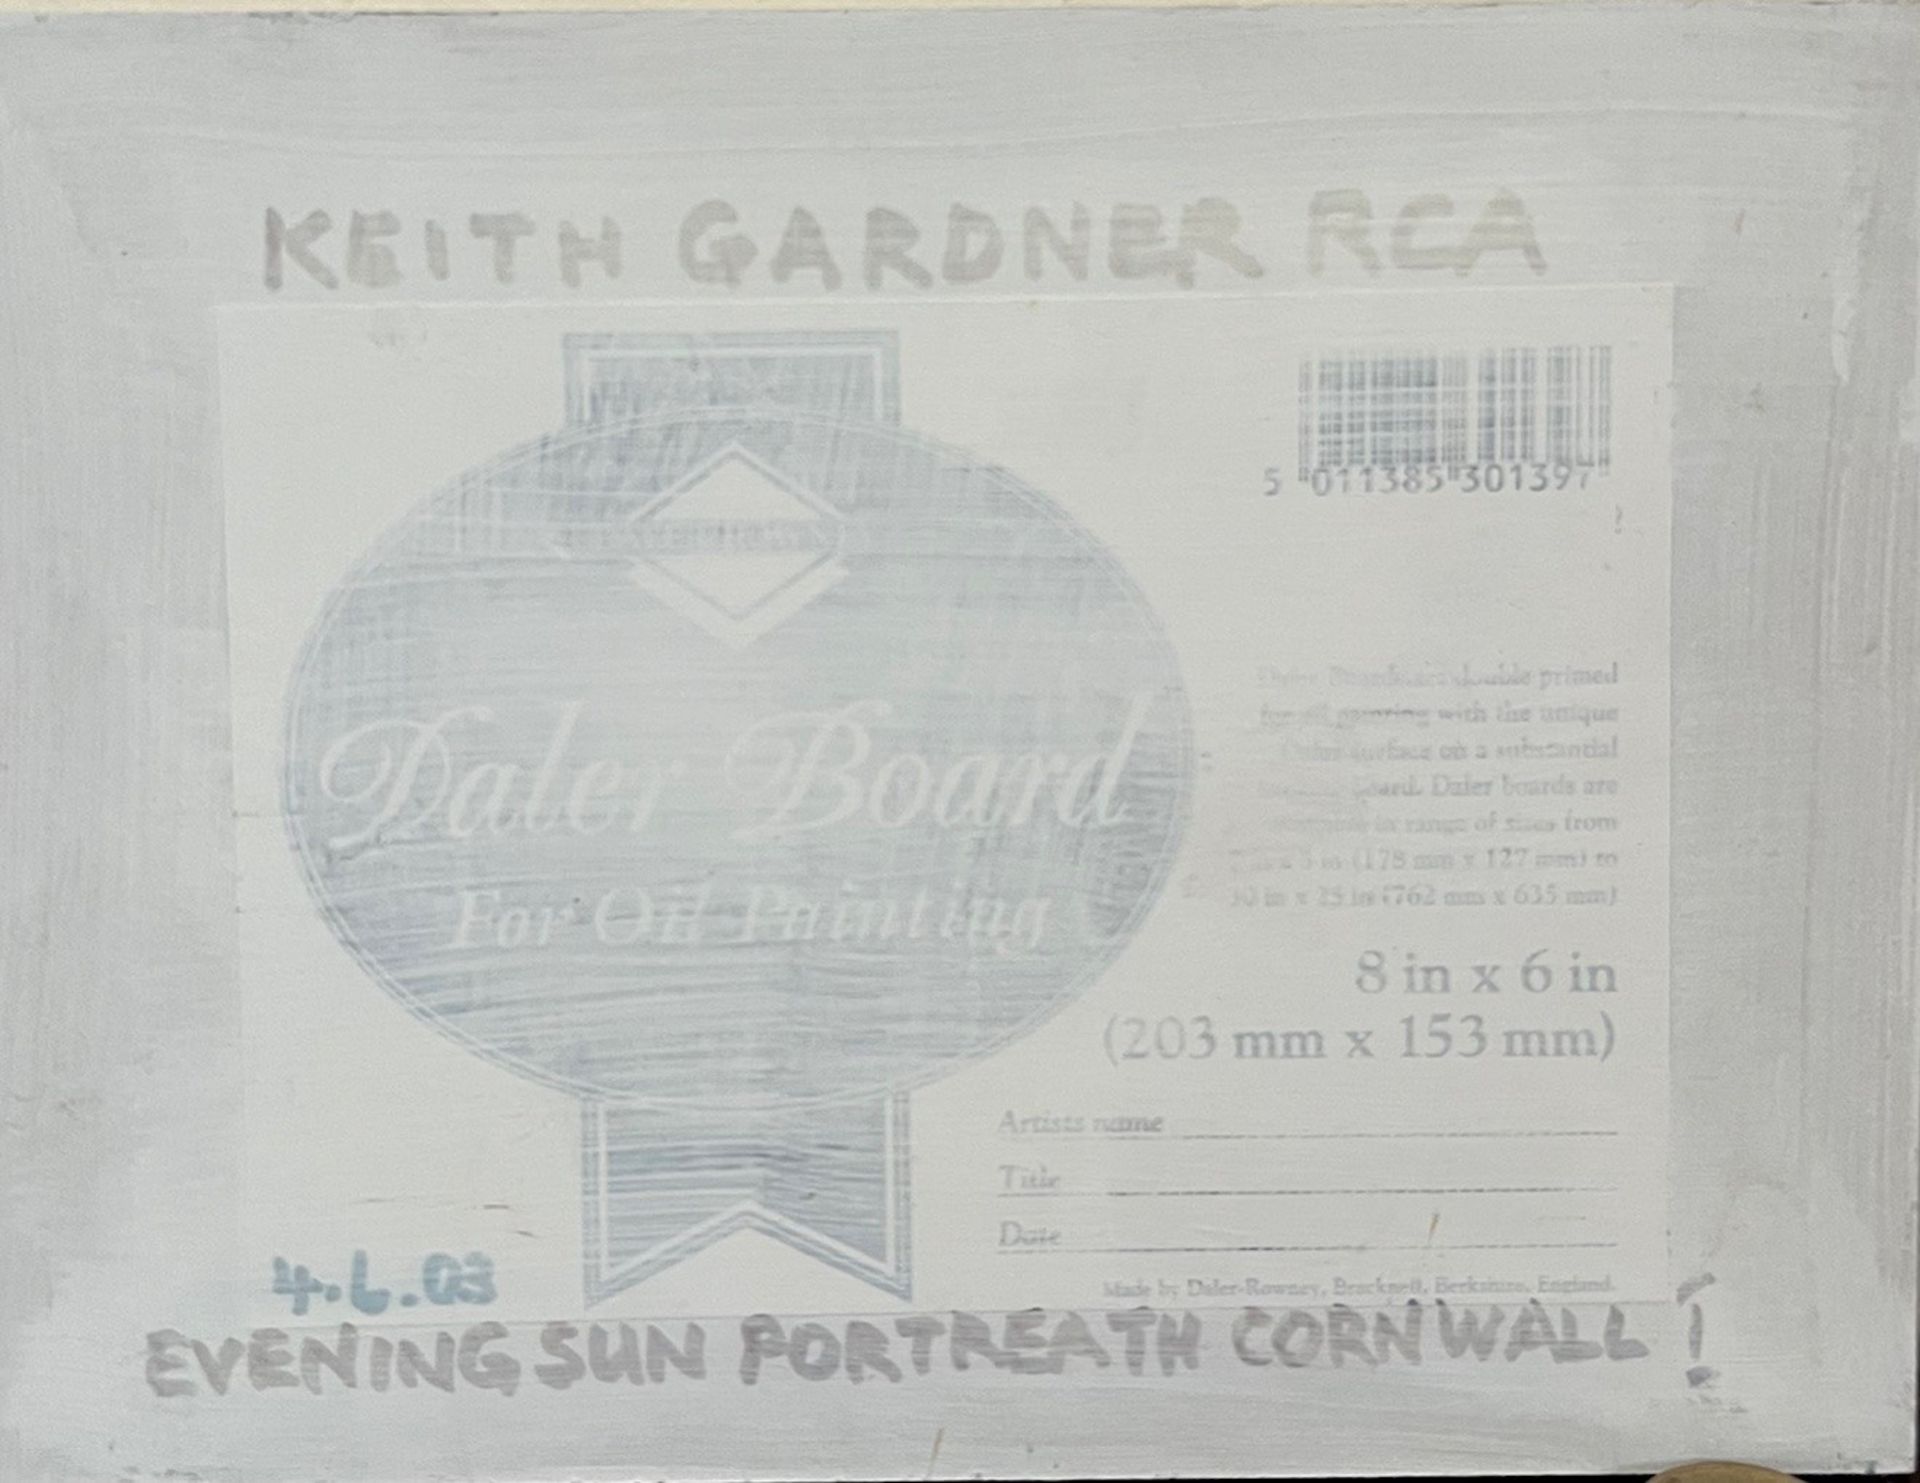 KEITH GARDNER RCA, OIL ON BOARD, 'EVENING SUN, PORT REATH CORNWALL', SIGNED LOWER CENTRE APPROX 15 x - Image 2 of 2